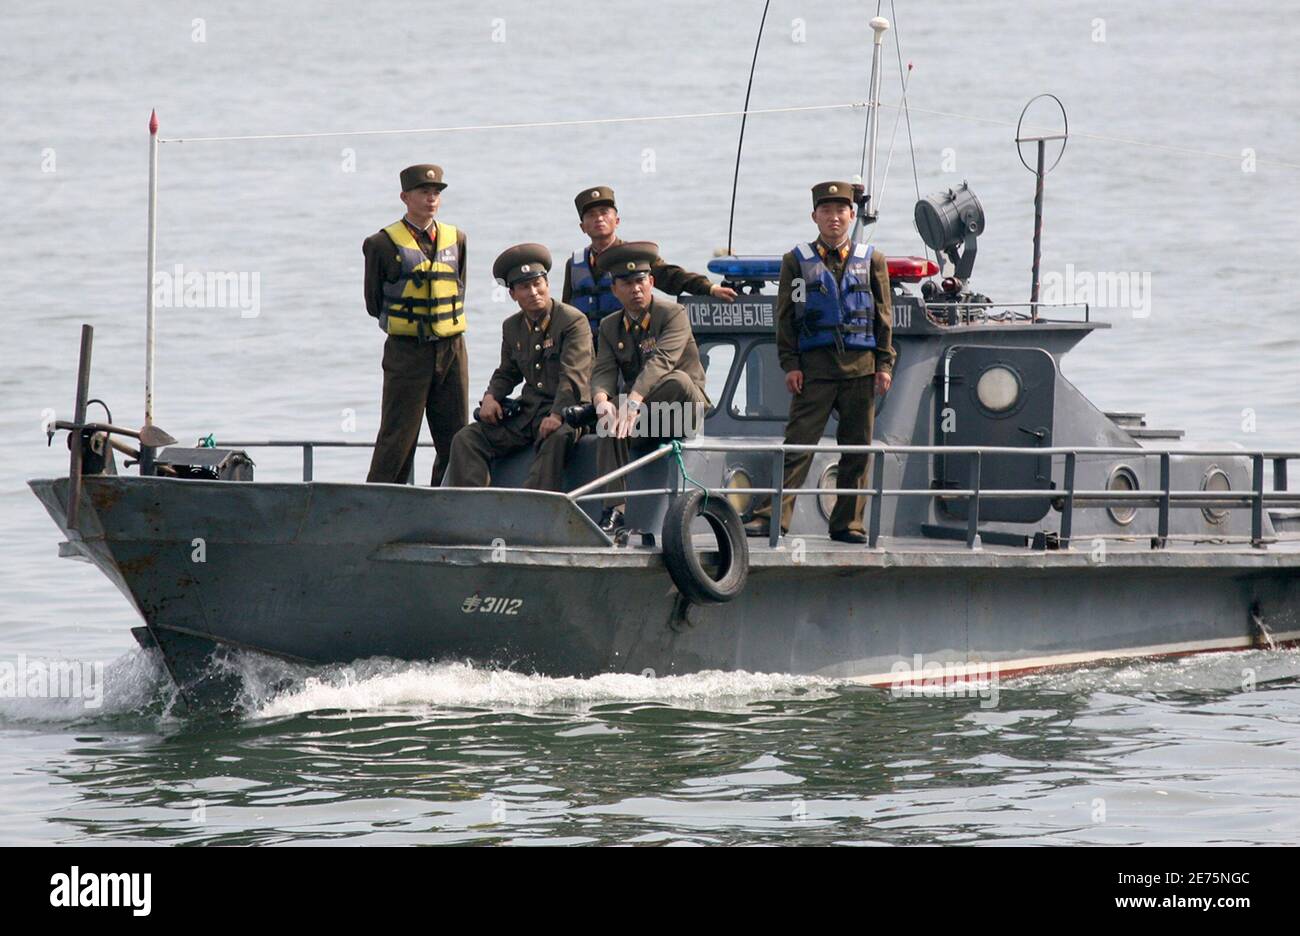 North Korean soldiers patrol on a military boat on the Yalu River near the North Korean town of Sinuiju, opposite the Chinese border city of Dandong, June 14, 2009. North Korea said on Saturday it would start a uranium enrichment program and weaponize all its plutonium in response to fresh U.N. sanctions, which the United States said it would work vigorously to enforce. Pyongyang also threatened military action if Washington and its allies tried to isolate it. REUTERS/Jacky Chen (NORTH KOREA MILITARY POLITICS) Stock Photo